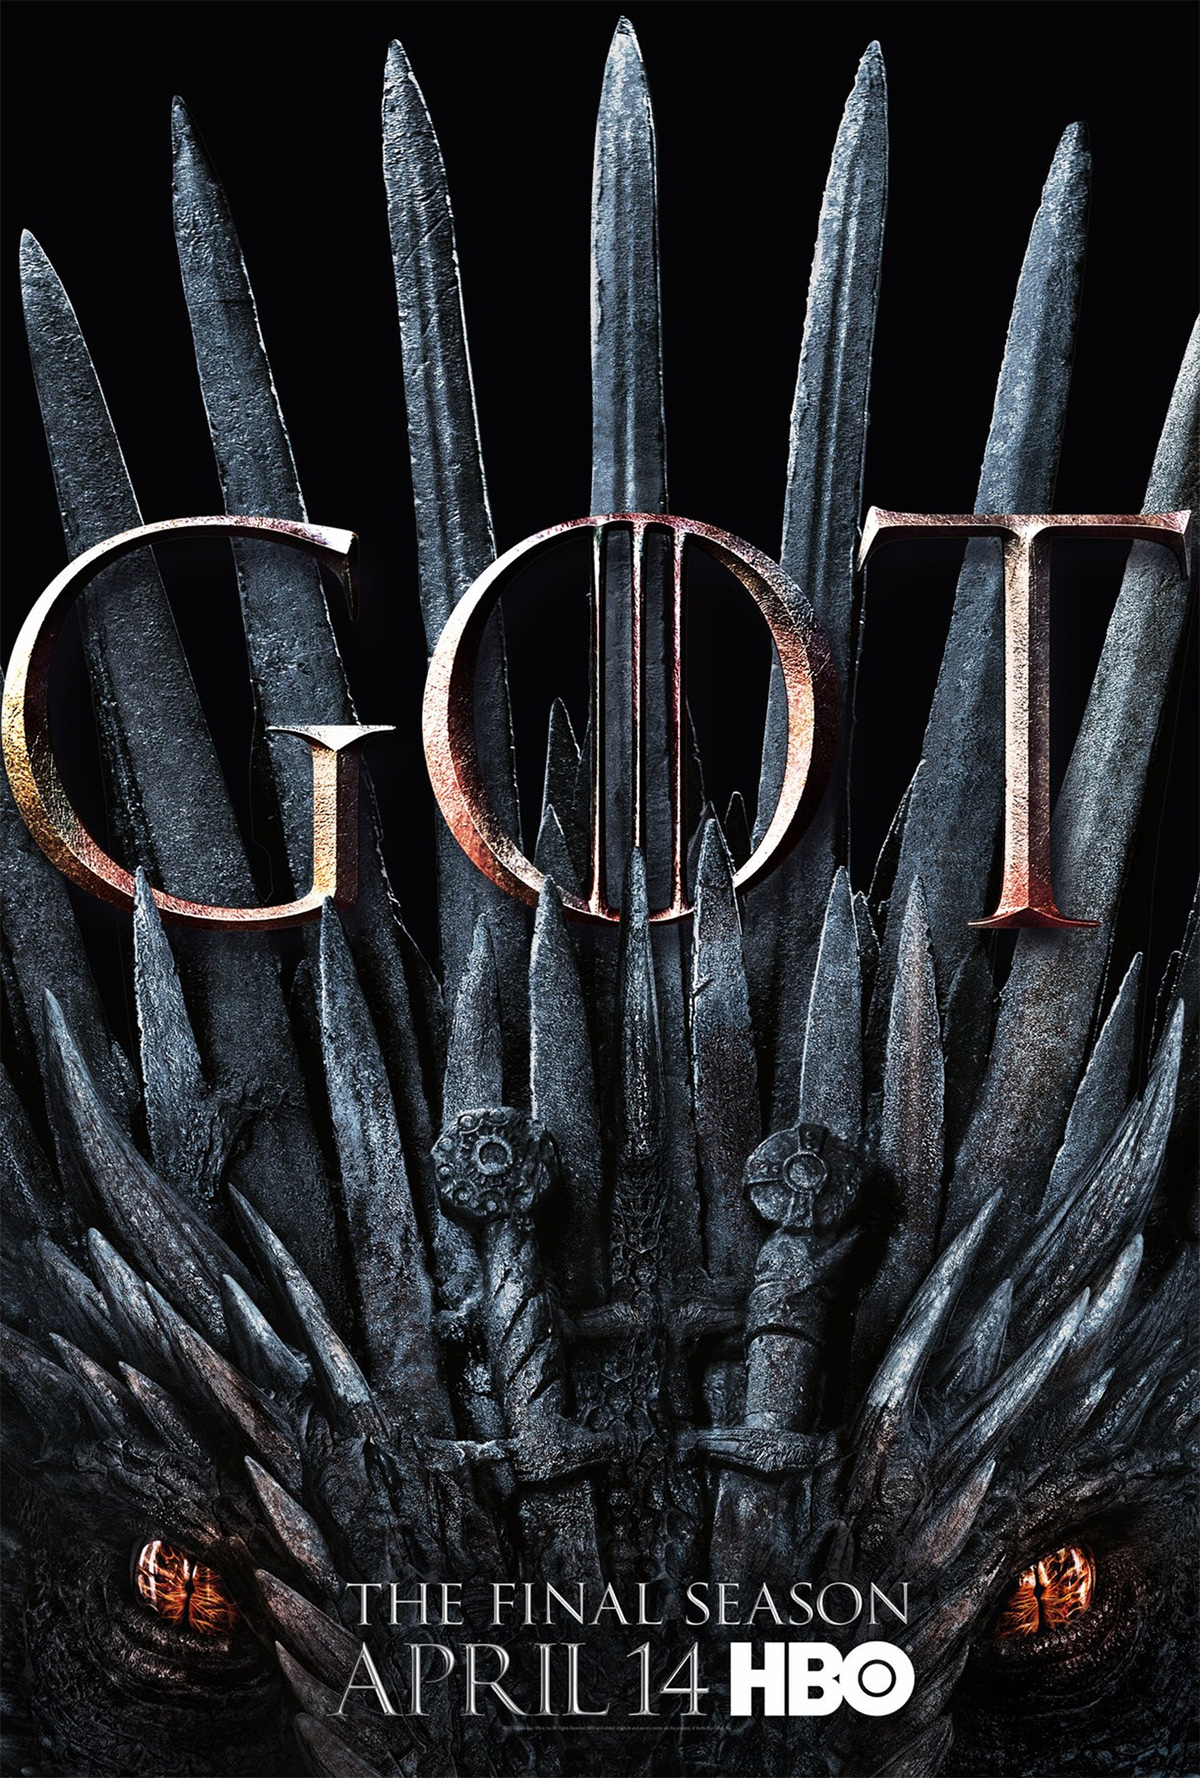 Post your Game of Thrones final season predictions NOW